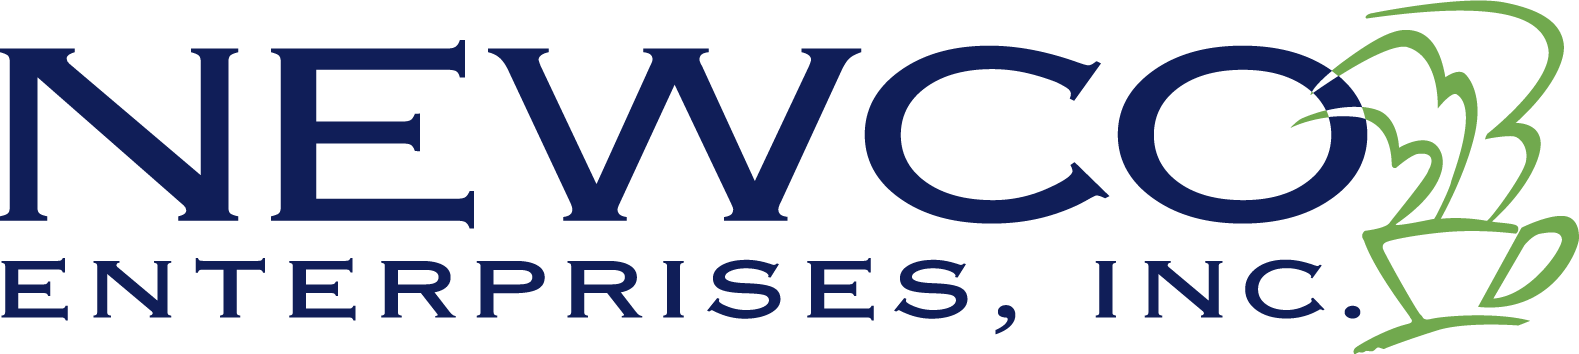 https://www.newcocoffee.com/wp-content/uploads/2018/05/newco-enterprises-logo.png